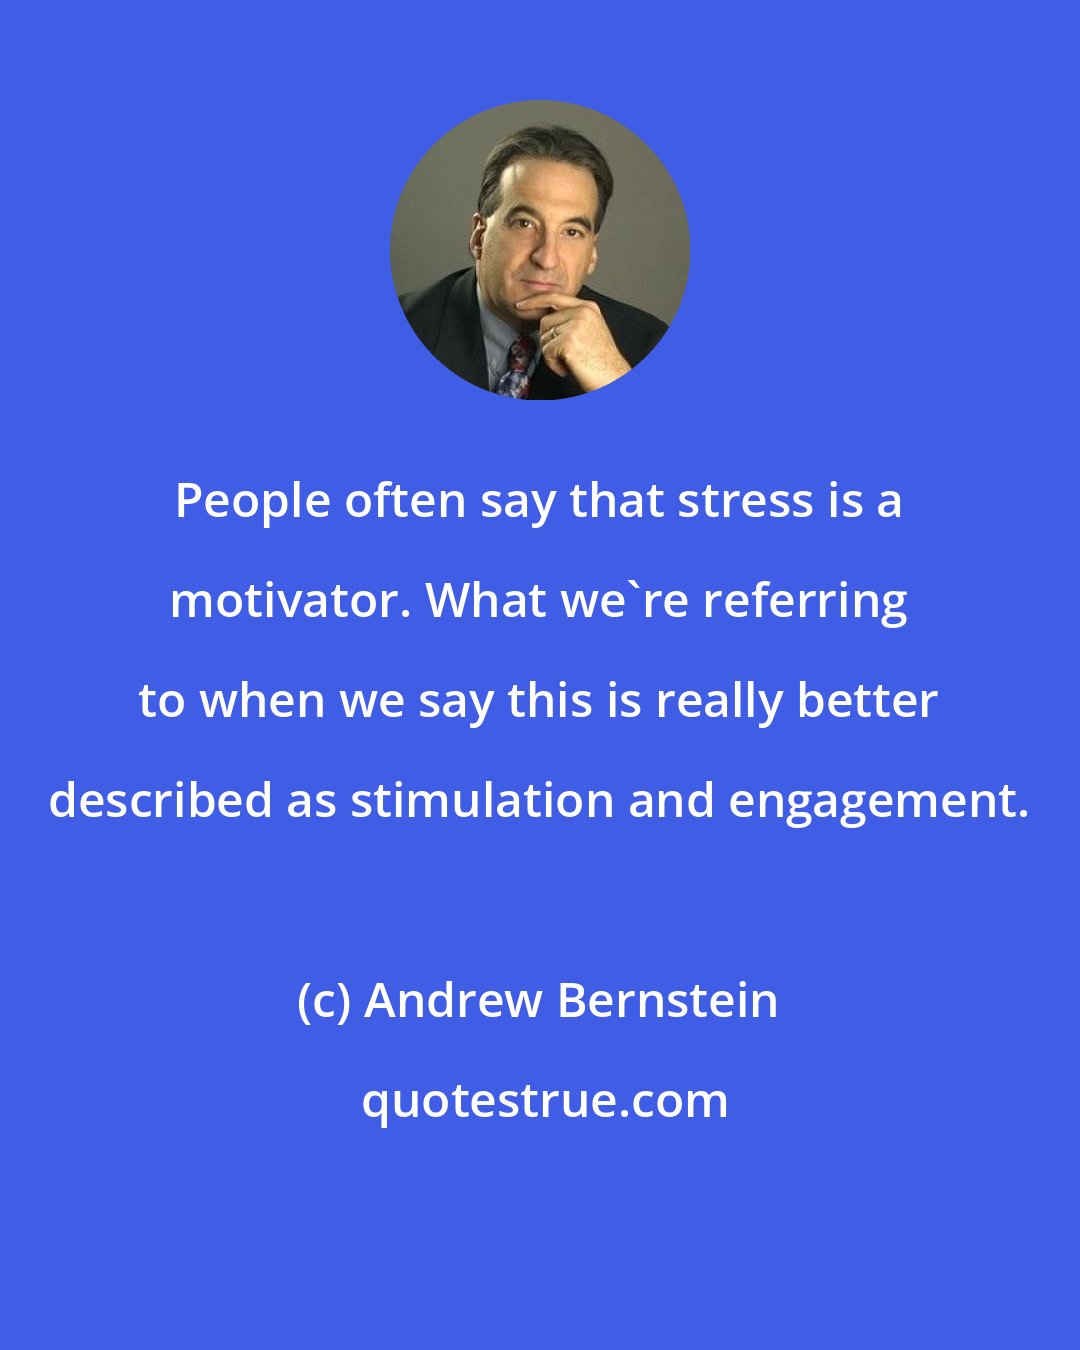 Andrew Bernstein: People often say that stress is a motivator. What we're referring to when we say this is really better described as stimulation and engagement.